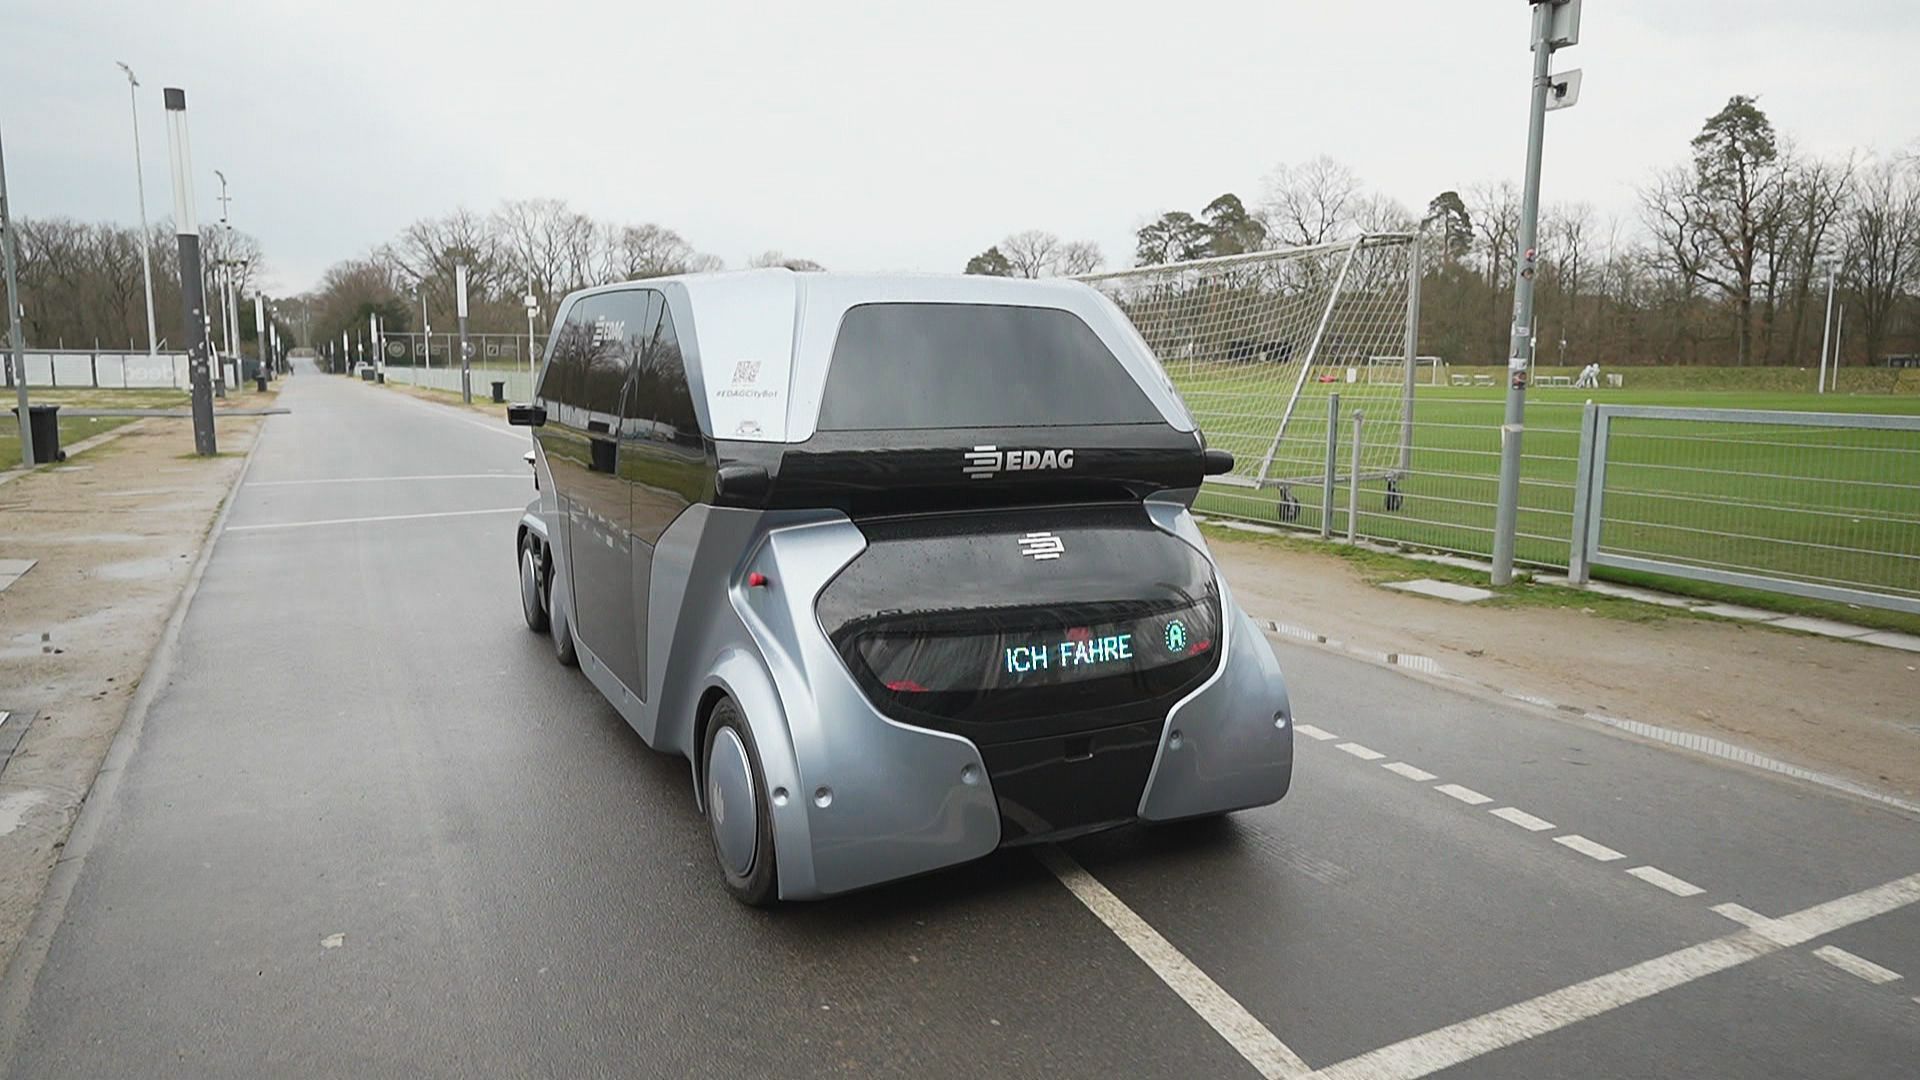 Watering, transportation, cleaning: Robotic vehicles as everyday helpers